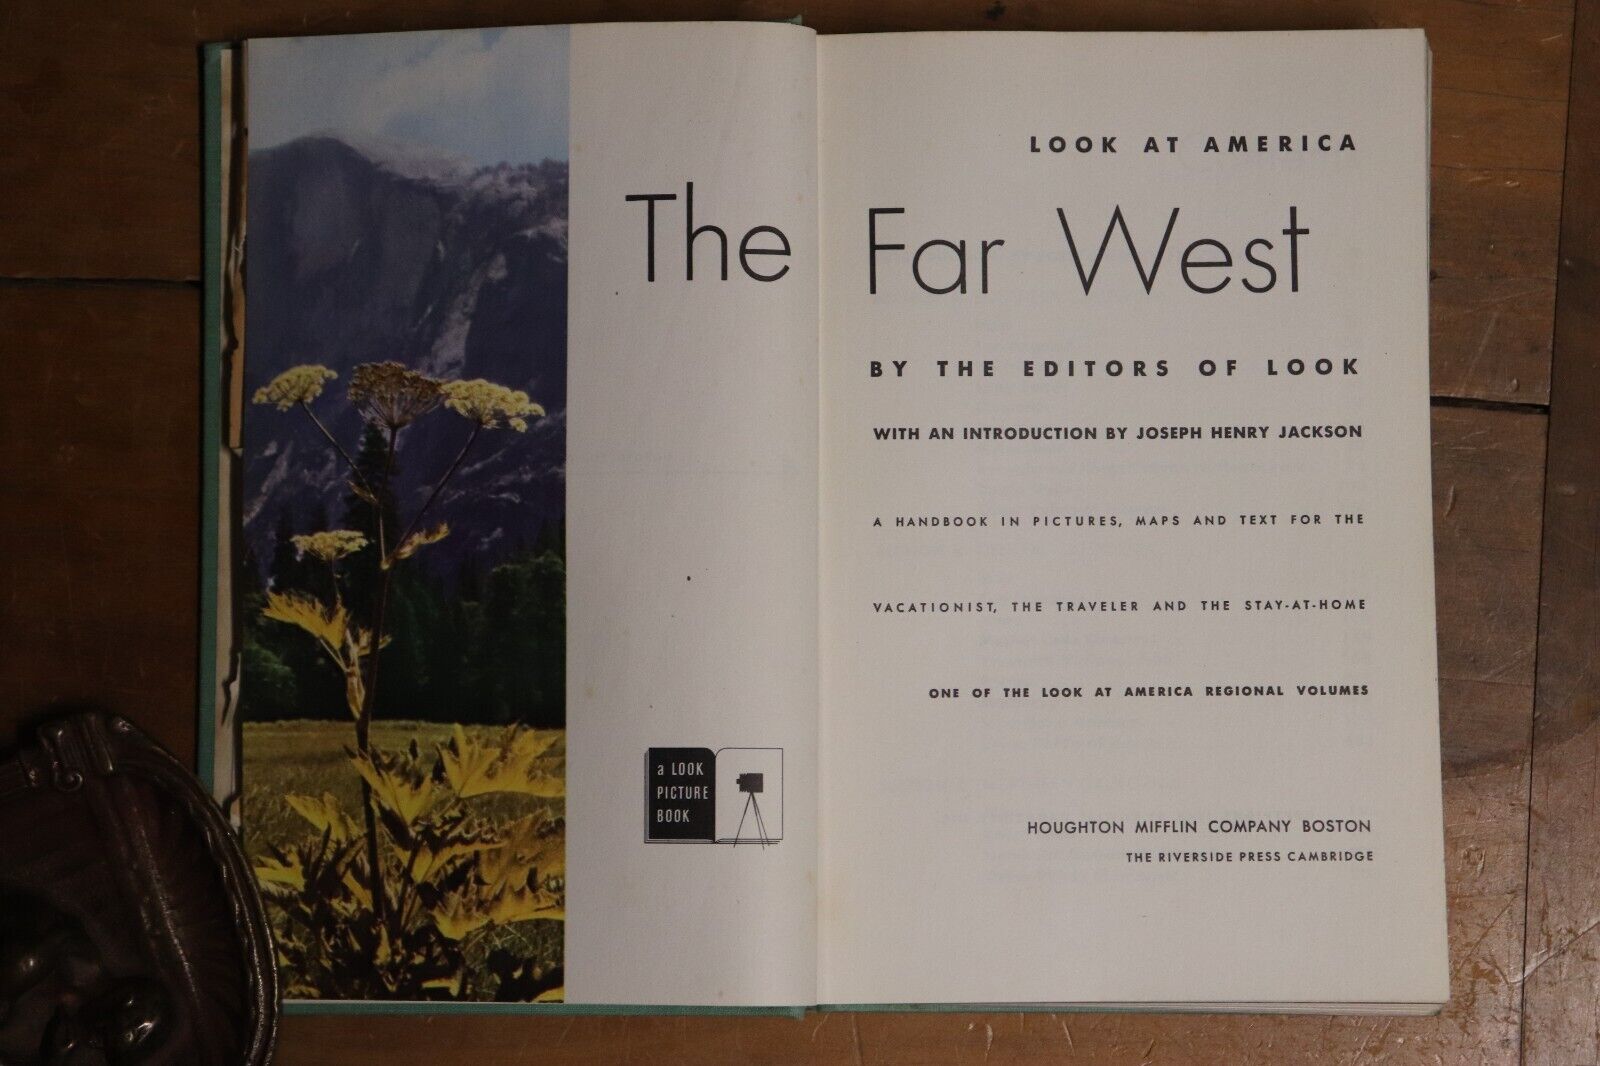 Look at America: The Far West - 1948 - 1st Edition Vintage Book